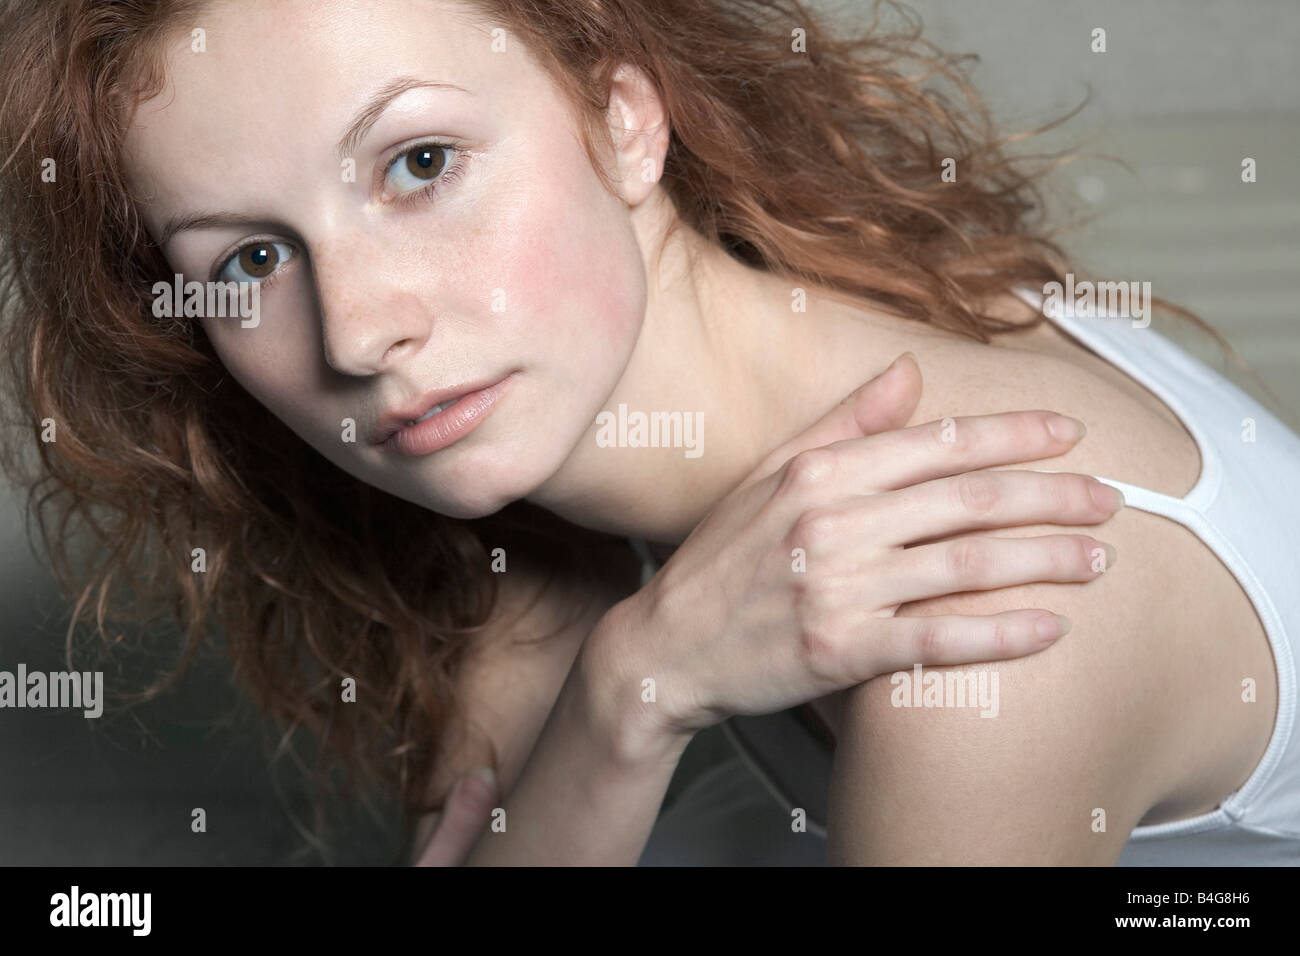 Portrait of a young woman with red hair Stock Photo